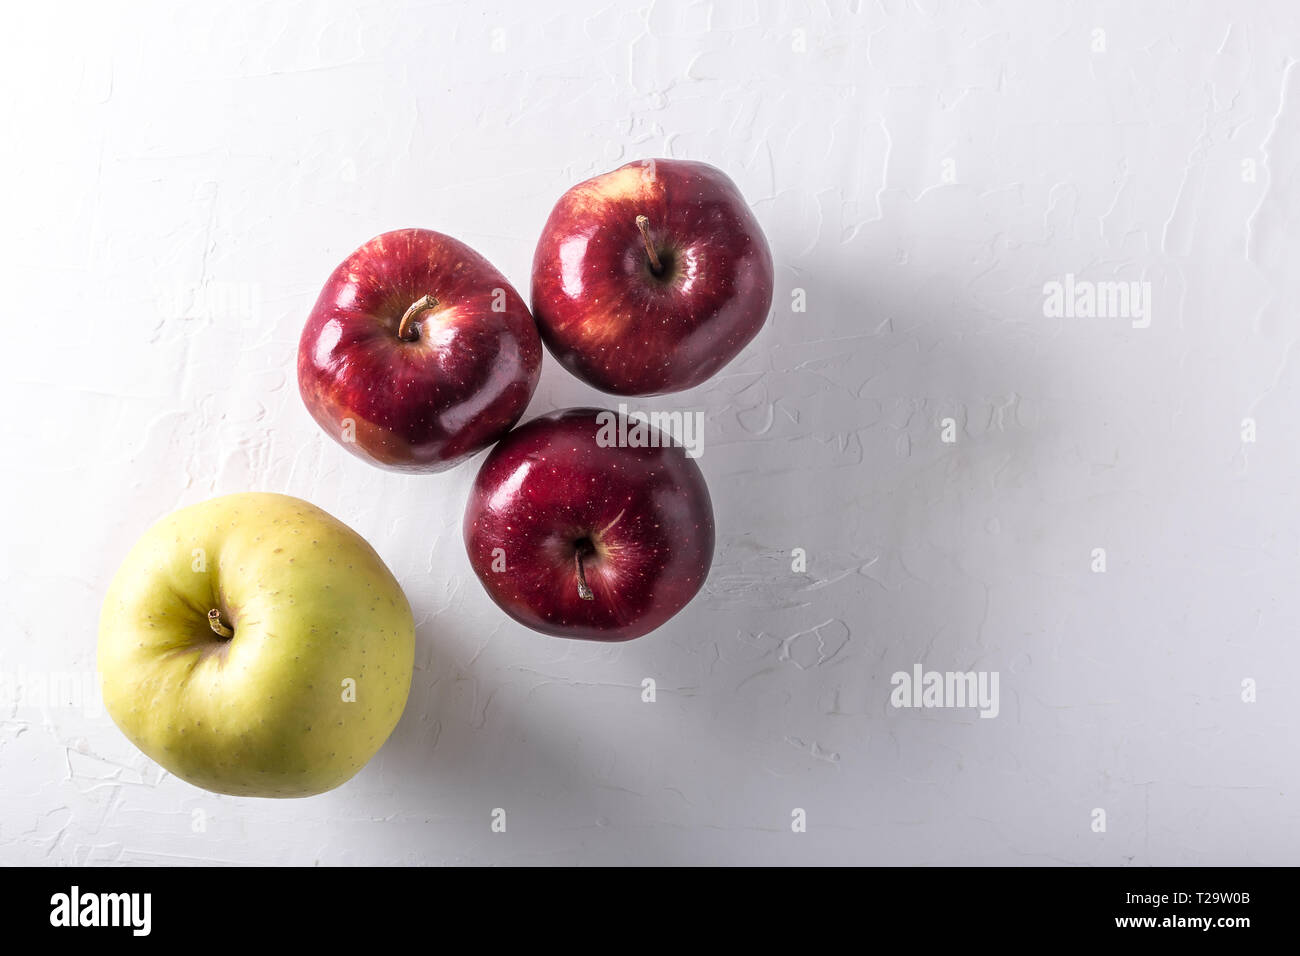 https://c8.alamy.com/comp/T29W0B/red-delicious-or-stark-apples-fruits-on-a-wooden-board-with-copyspace-T29W0B.jpg